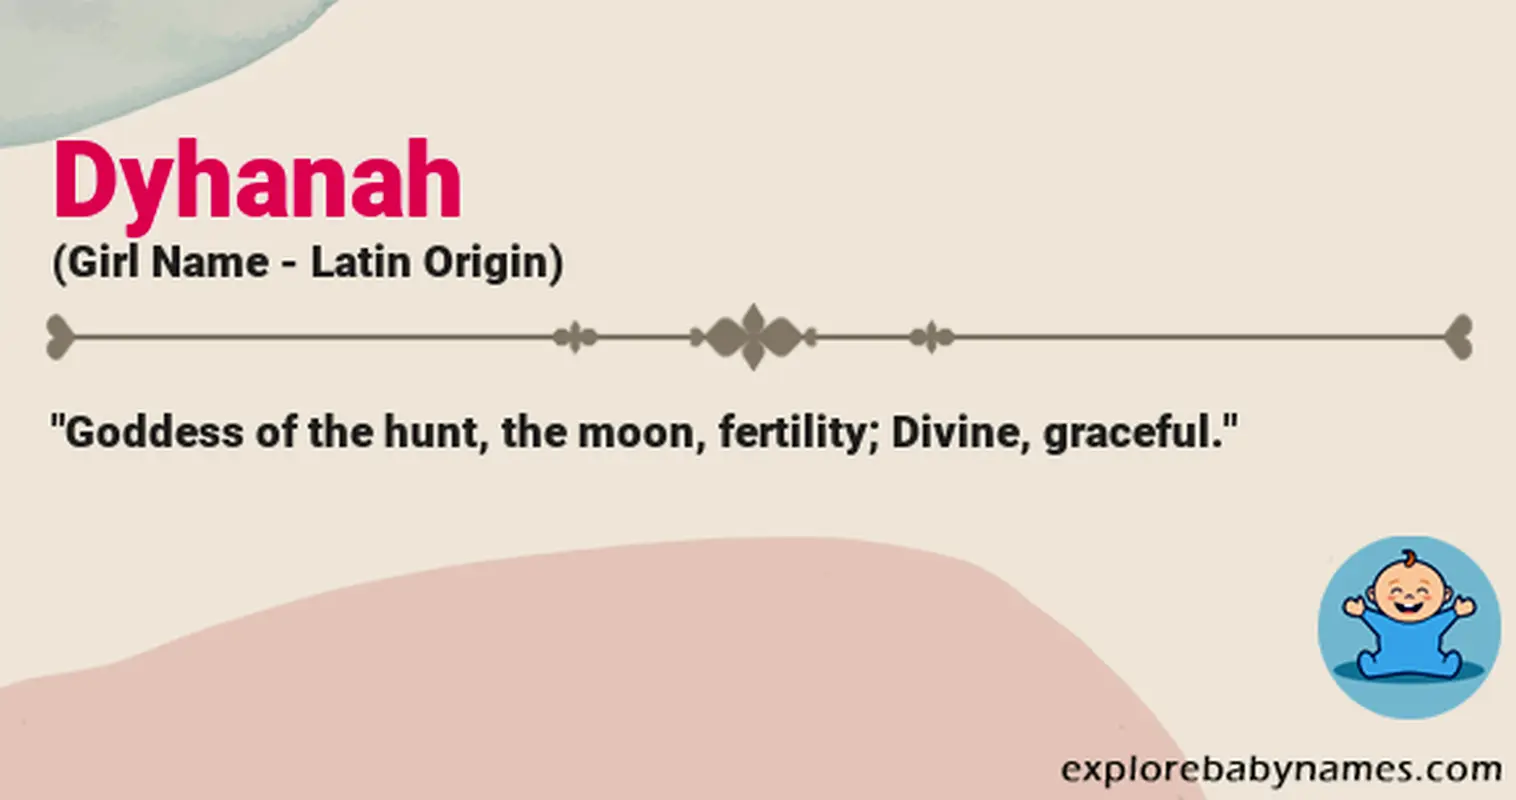 Meaning of Dyhanah